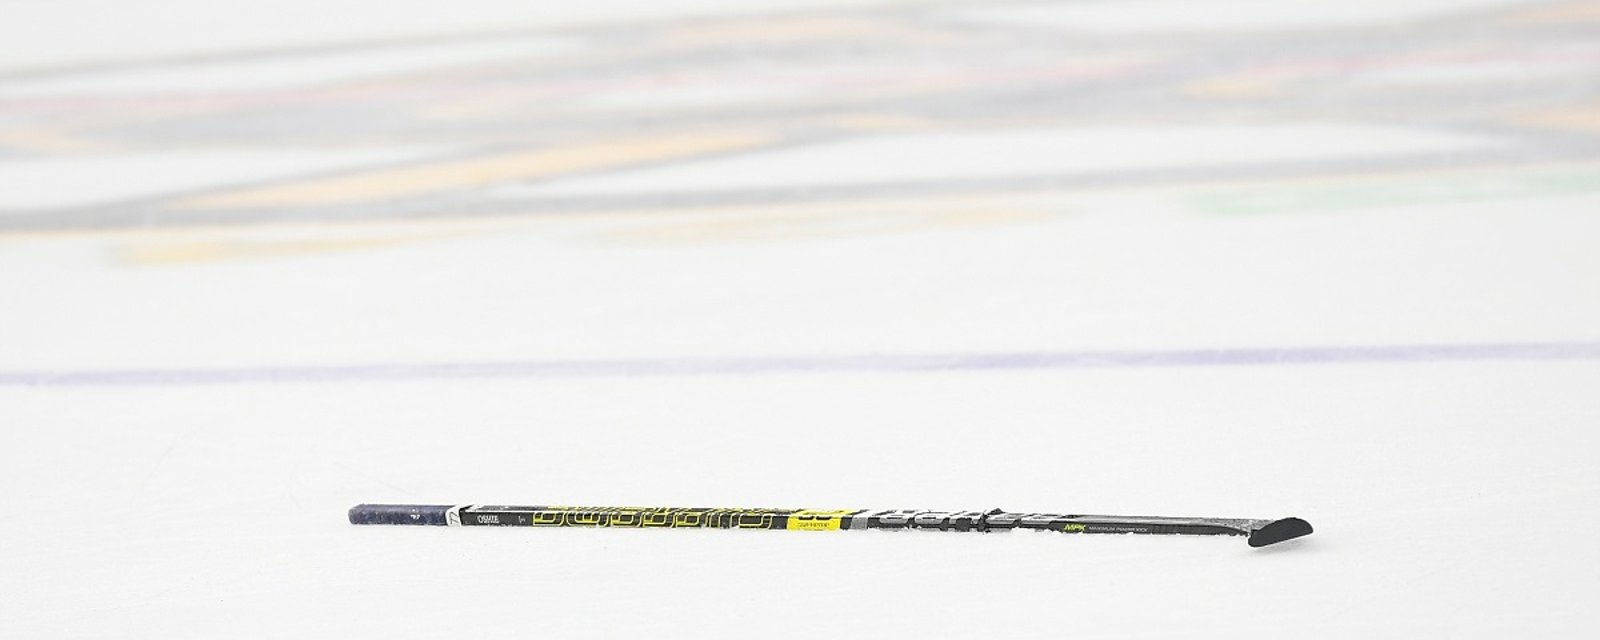 NHL players experiencing a shortage of sticks due to coronavirus outbreak in China.